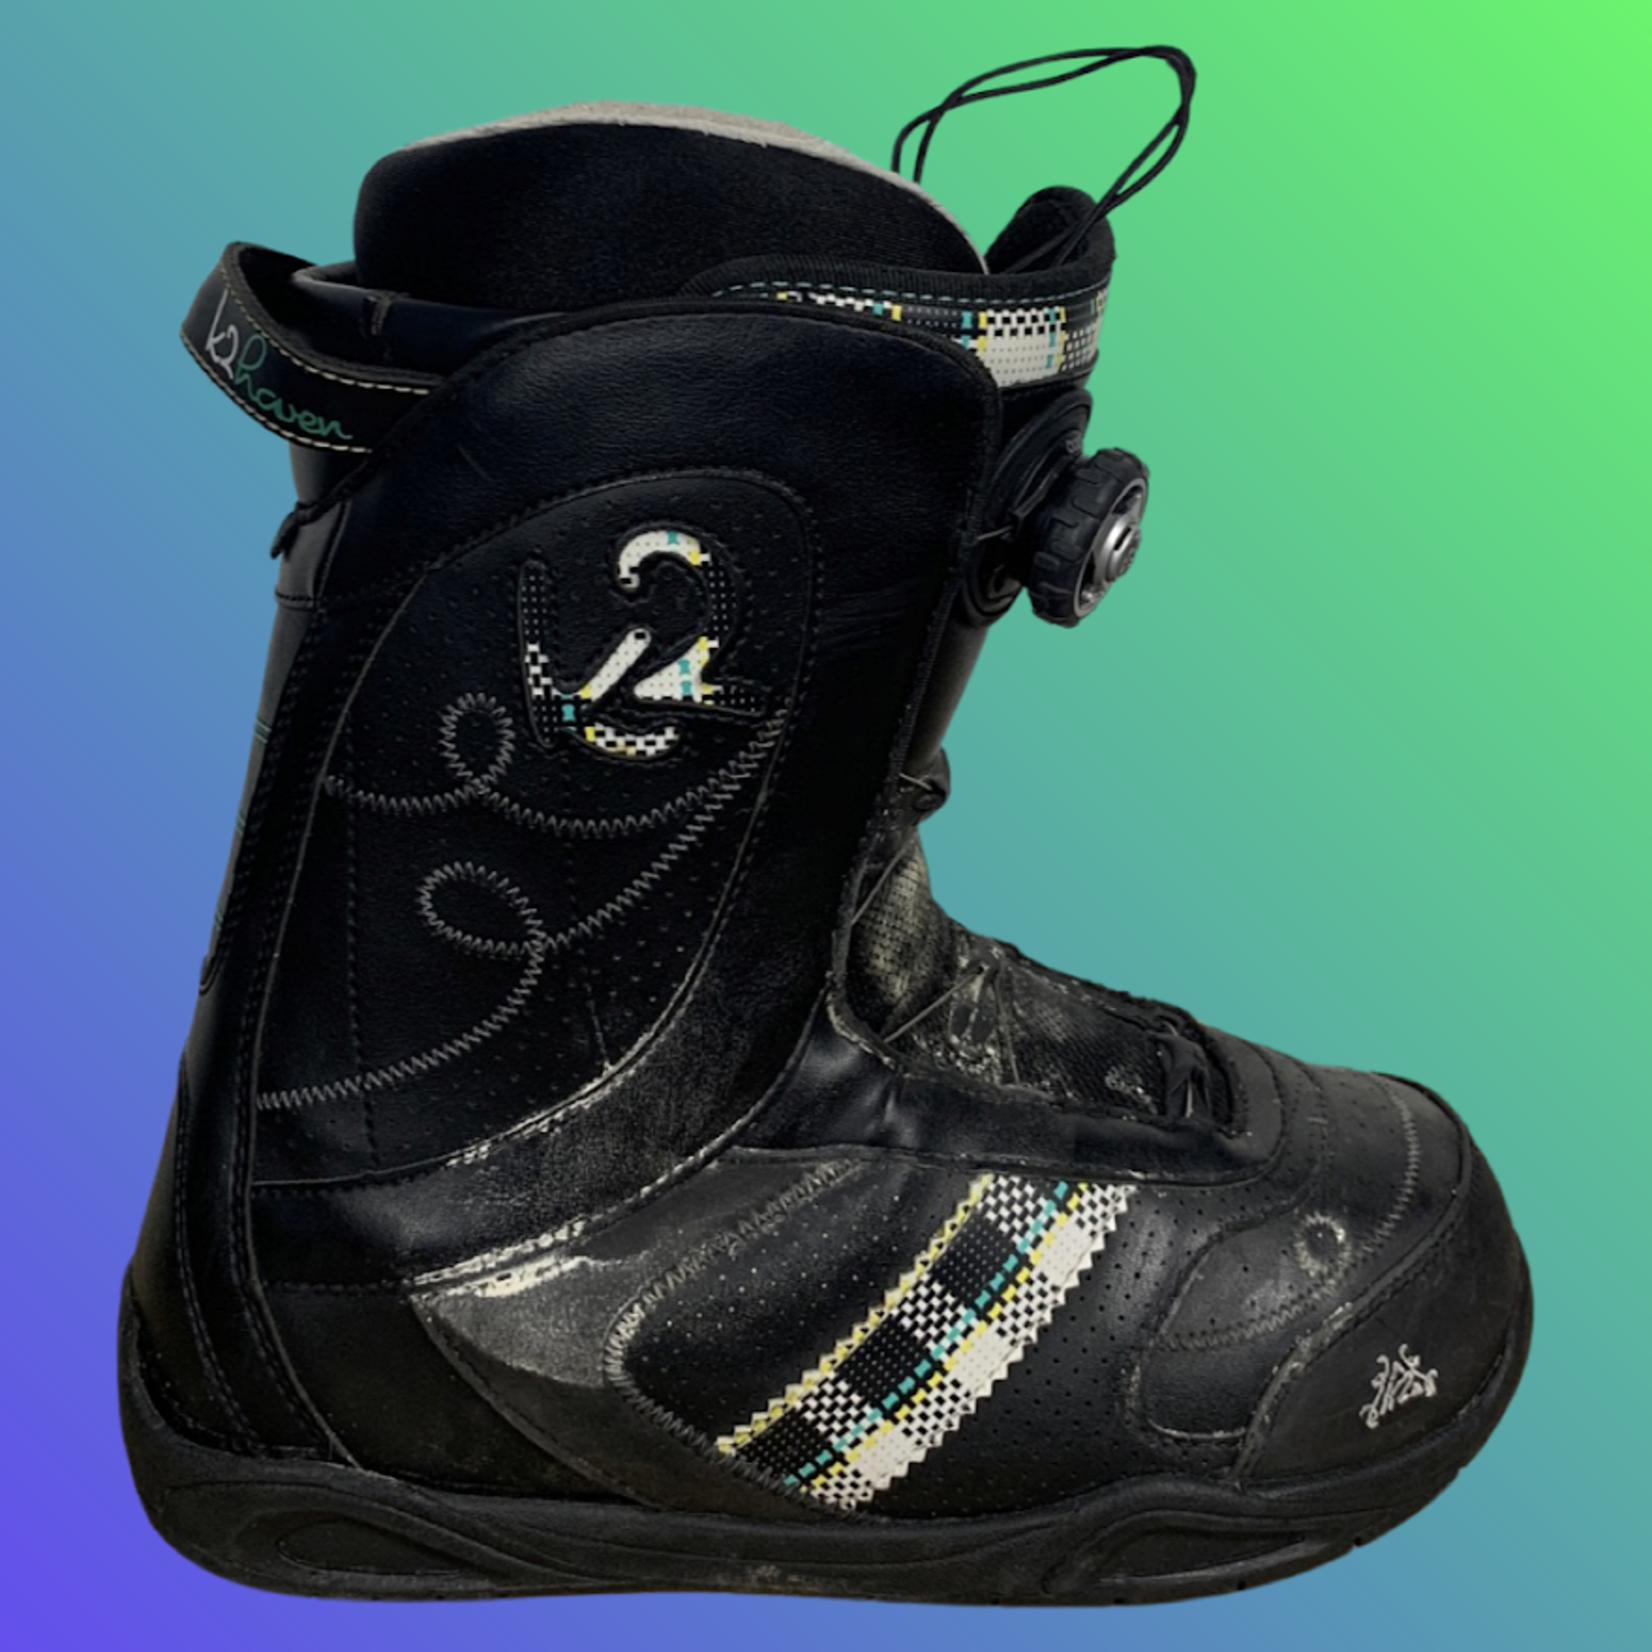 K2 Haven Snowboard Boots, Size 9